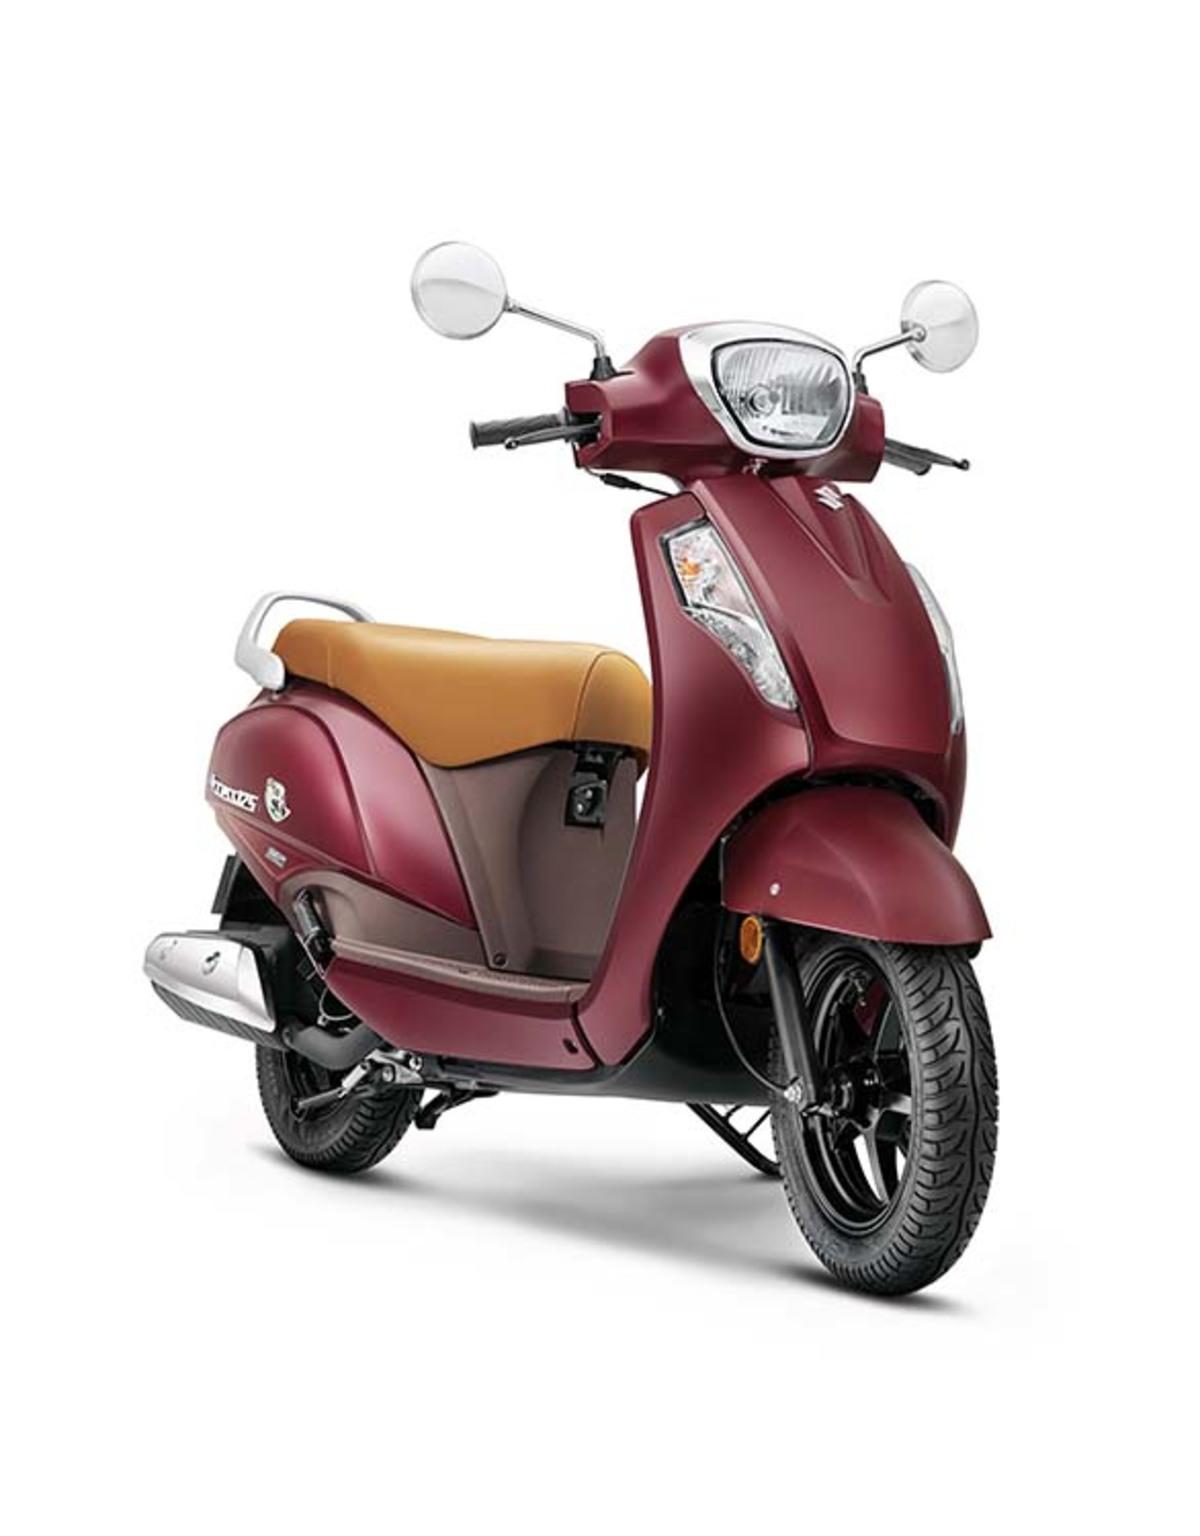 axis 125 scooty price